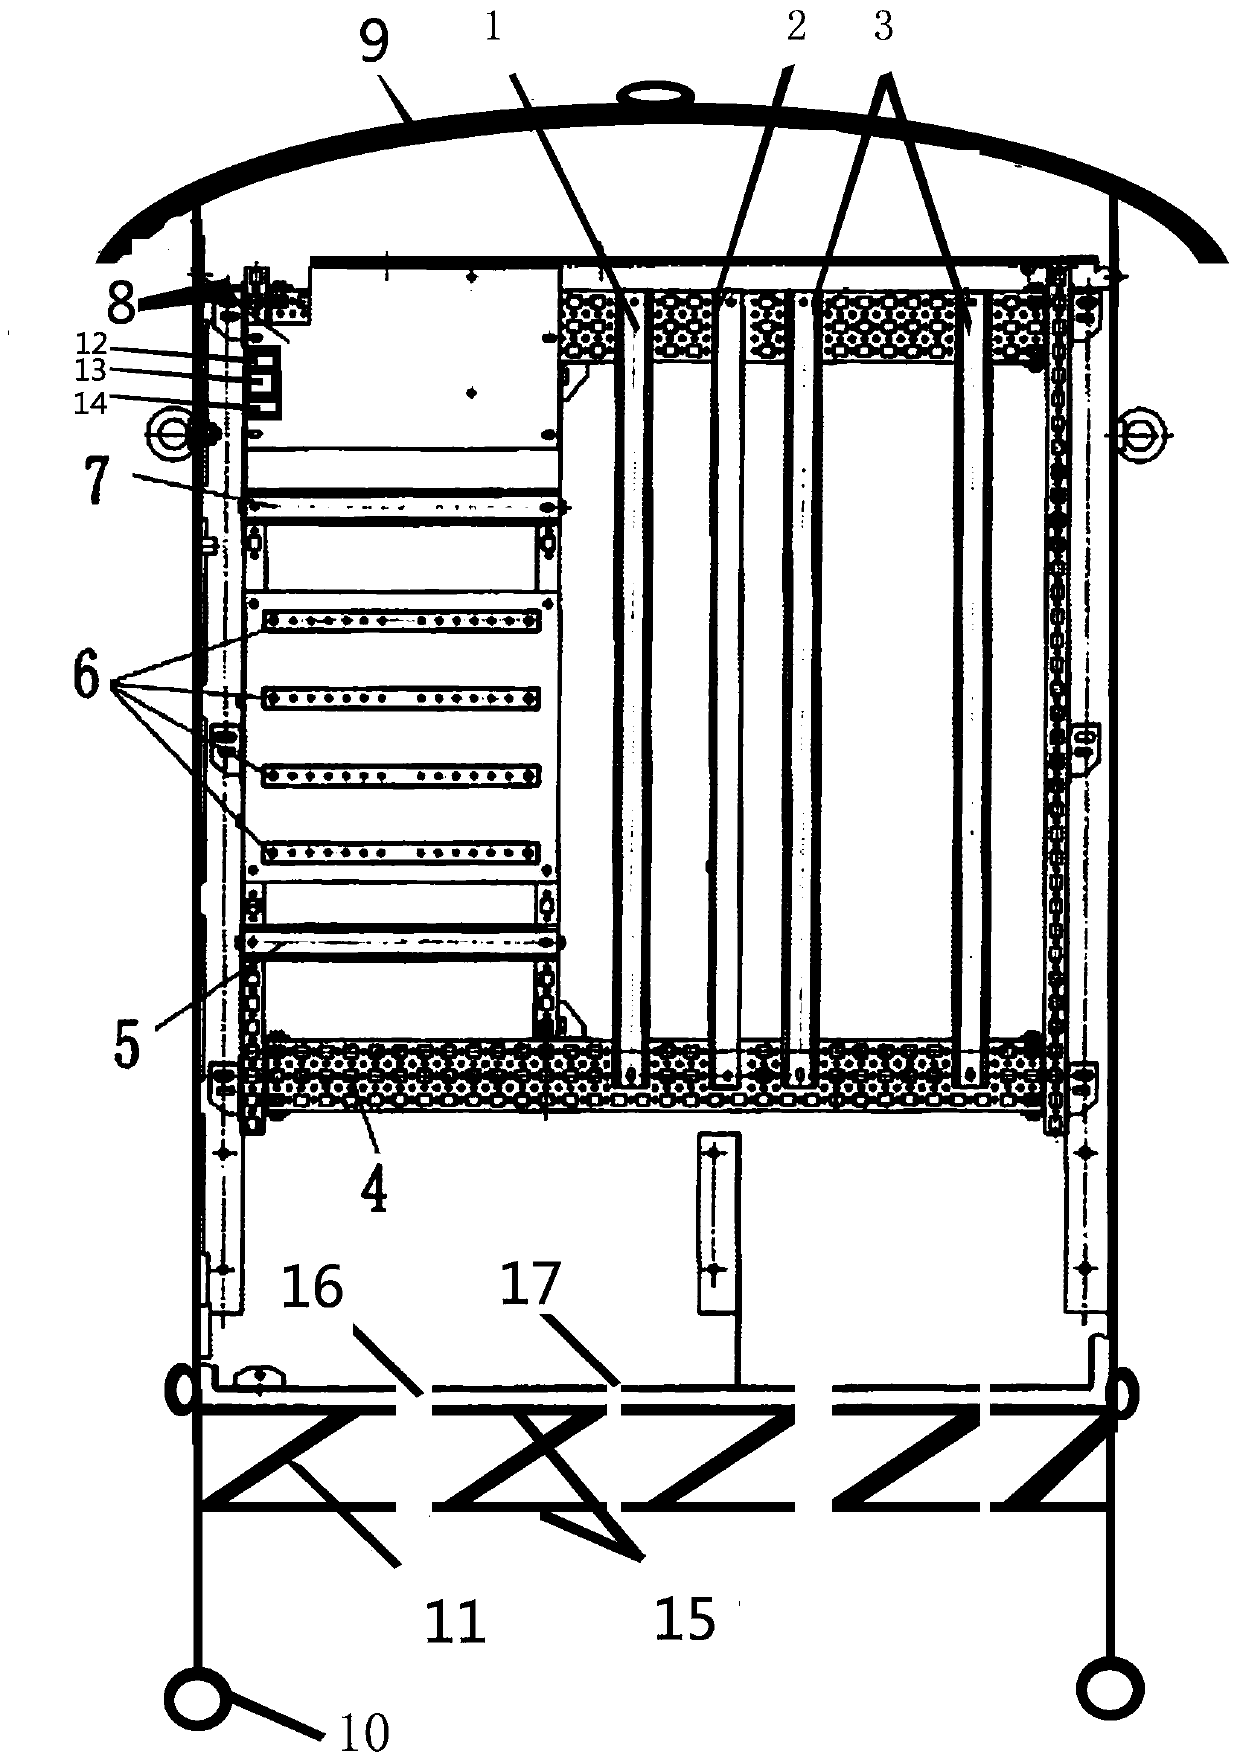 Box-type combined total terminal box for secondary line collection terminal of 220kV novel composite apparatus